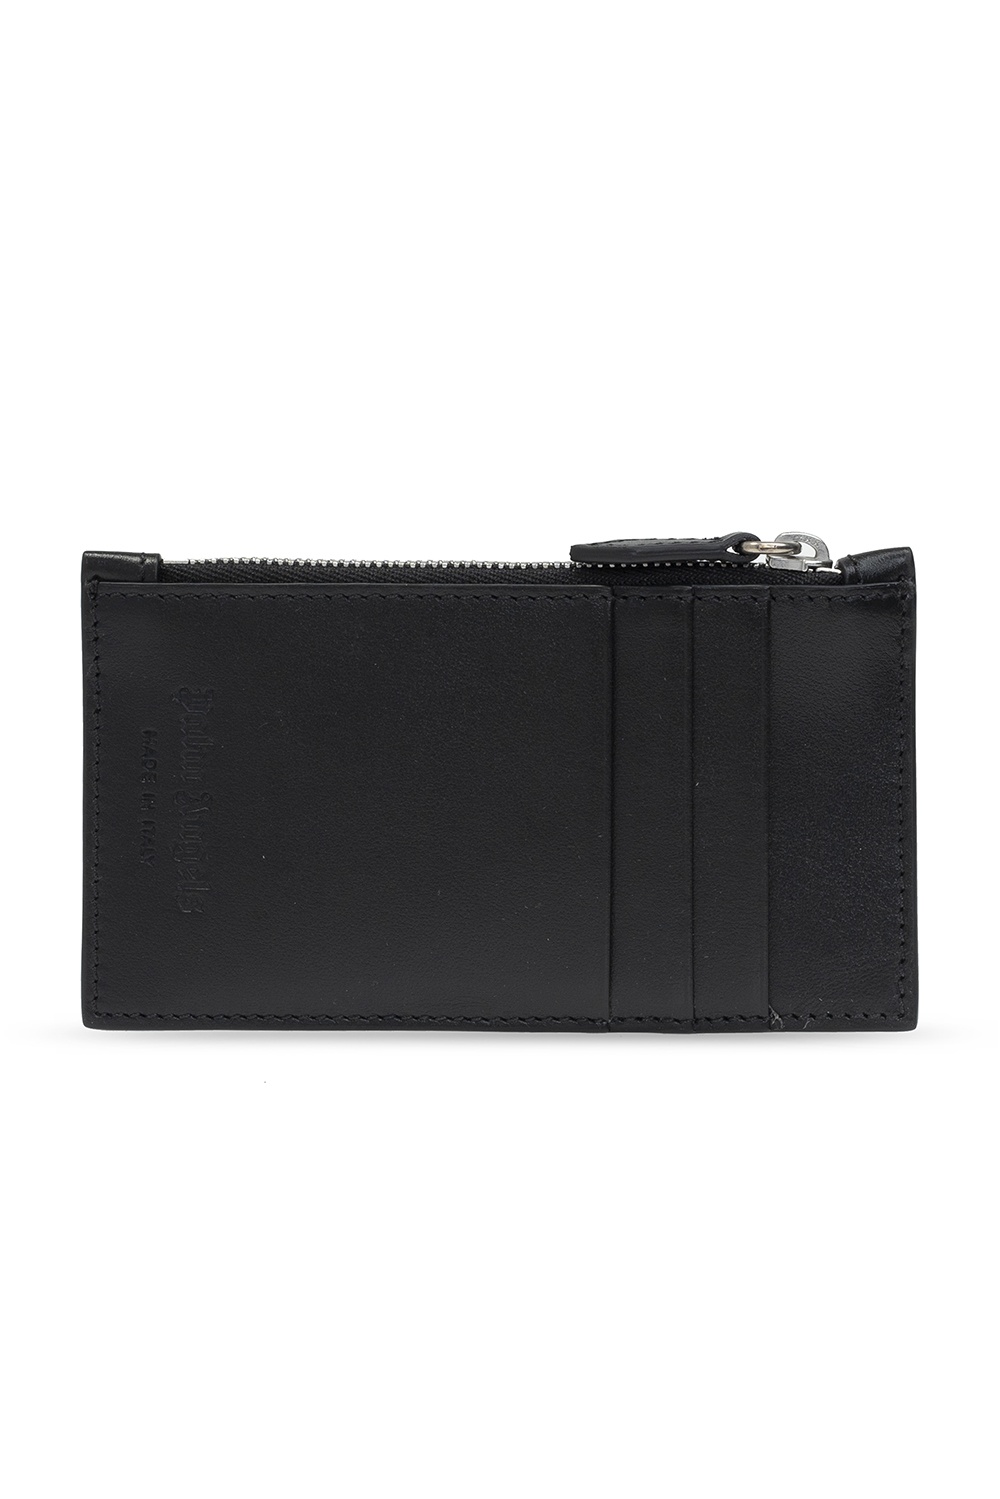 Palm Angels Branded card case